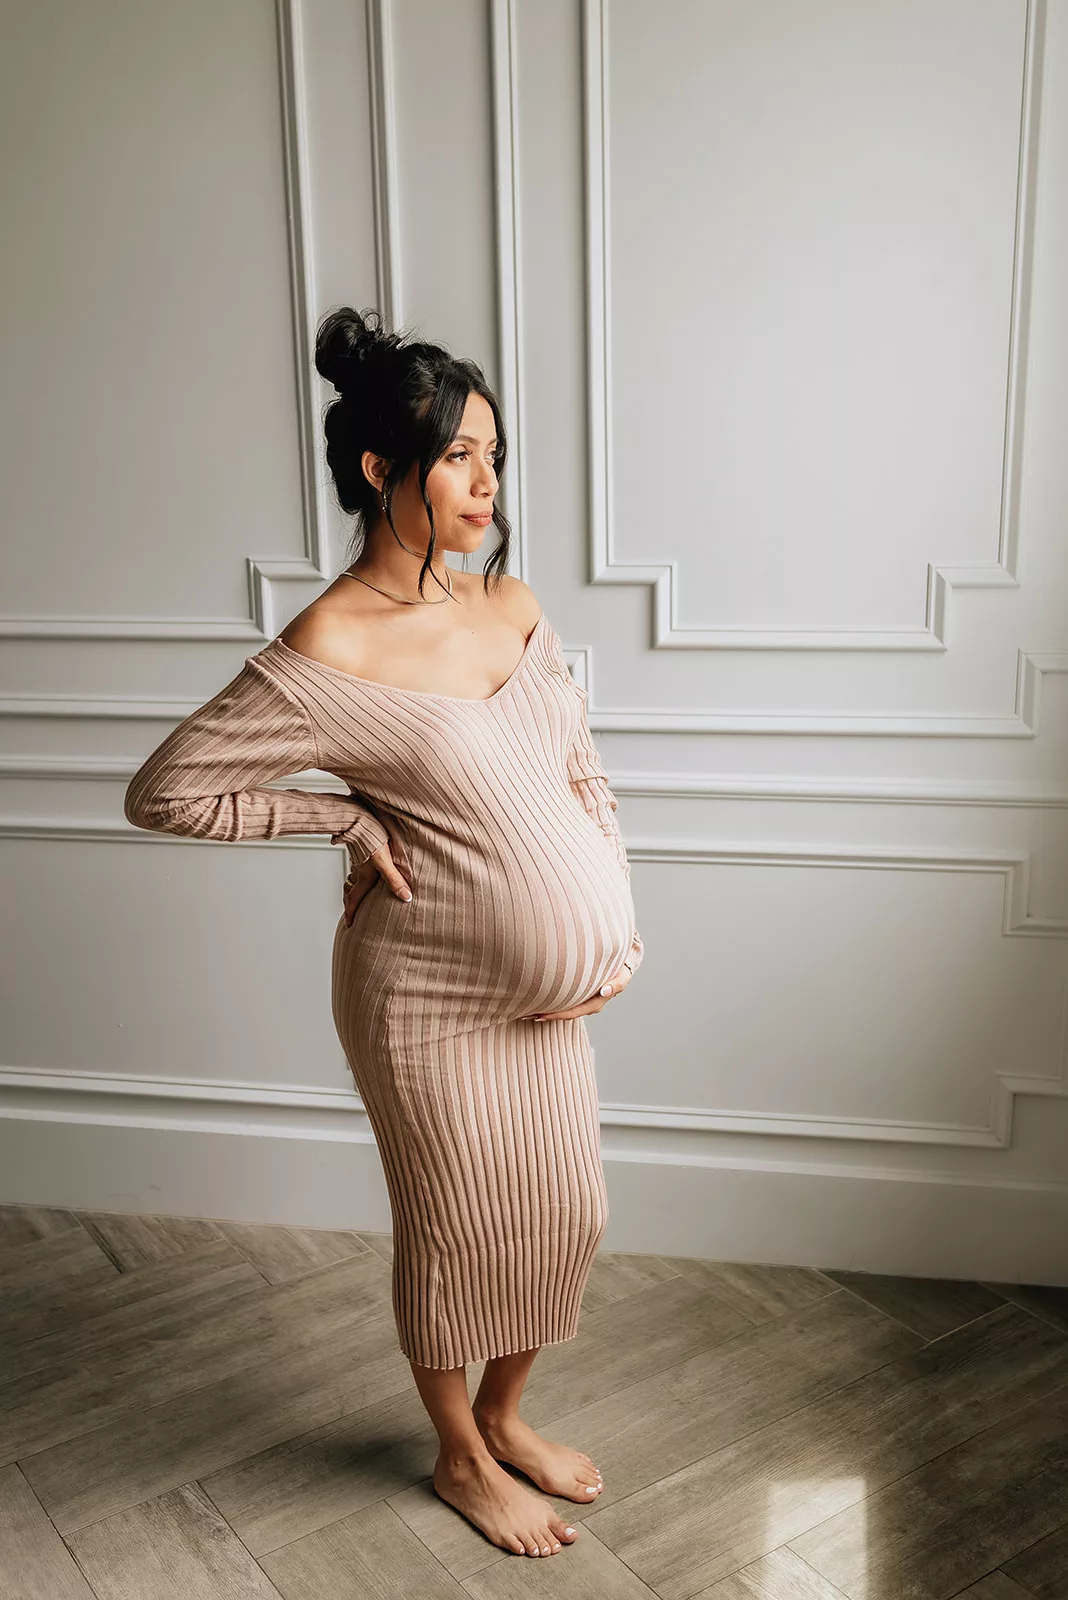 A mom to be in a beige maternity dress stands in a studio looking out the window and holding her bump after her 3D Ultrasound In Houston